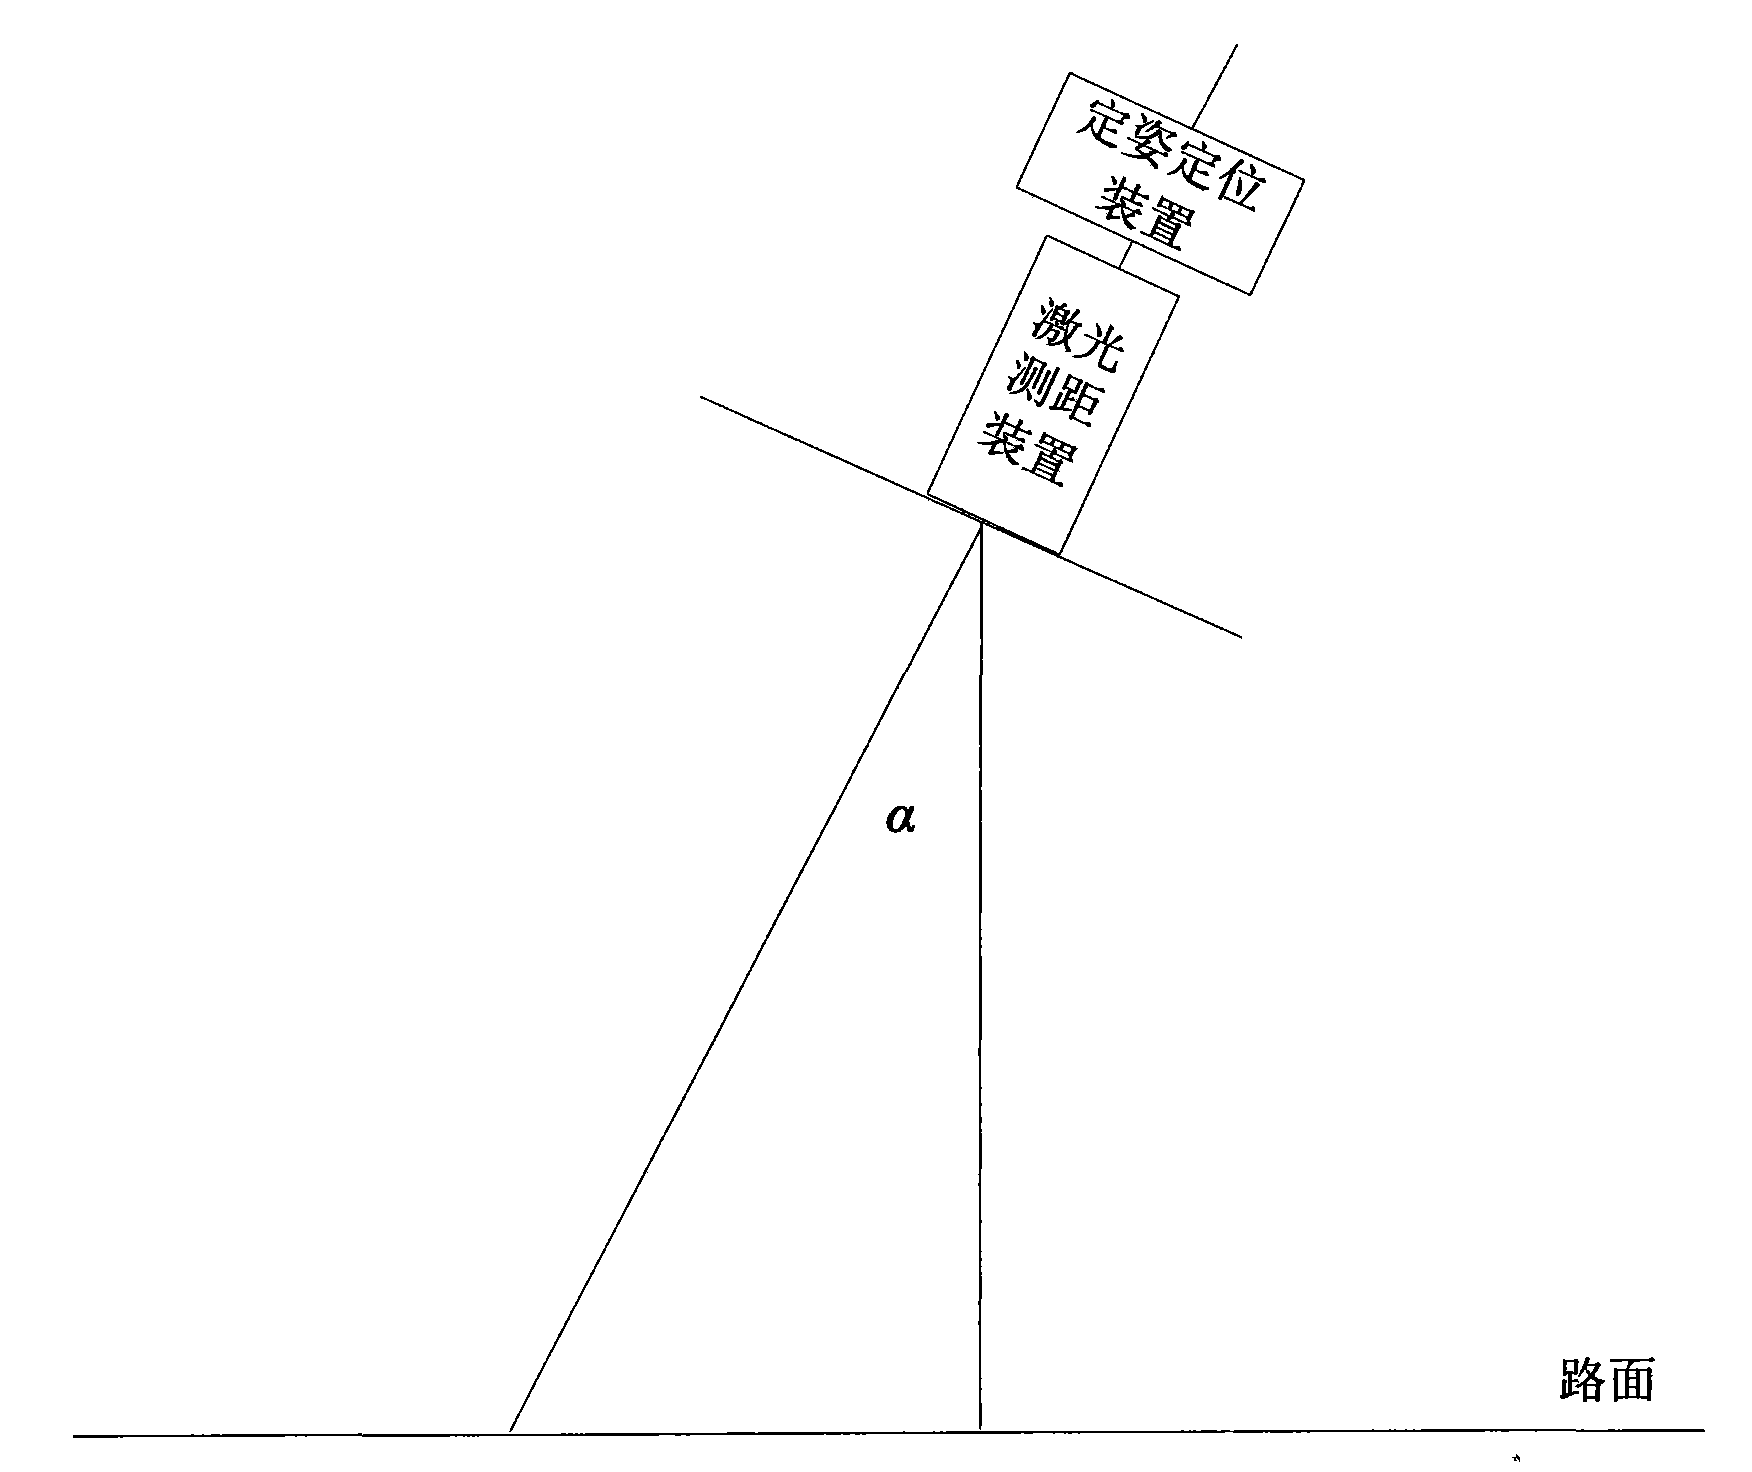 Detection method of road-surface evenness